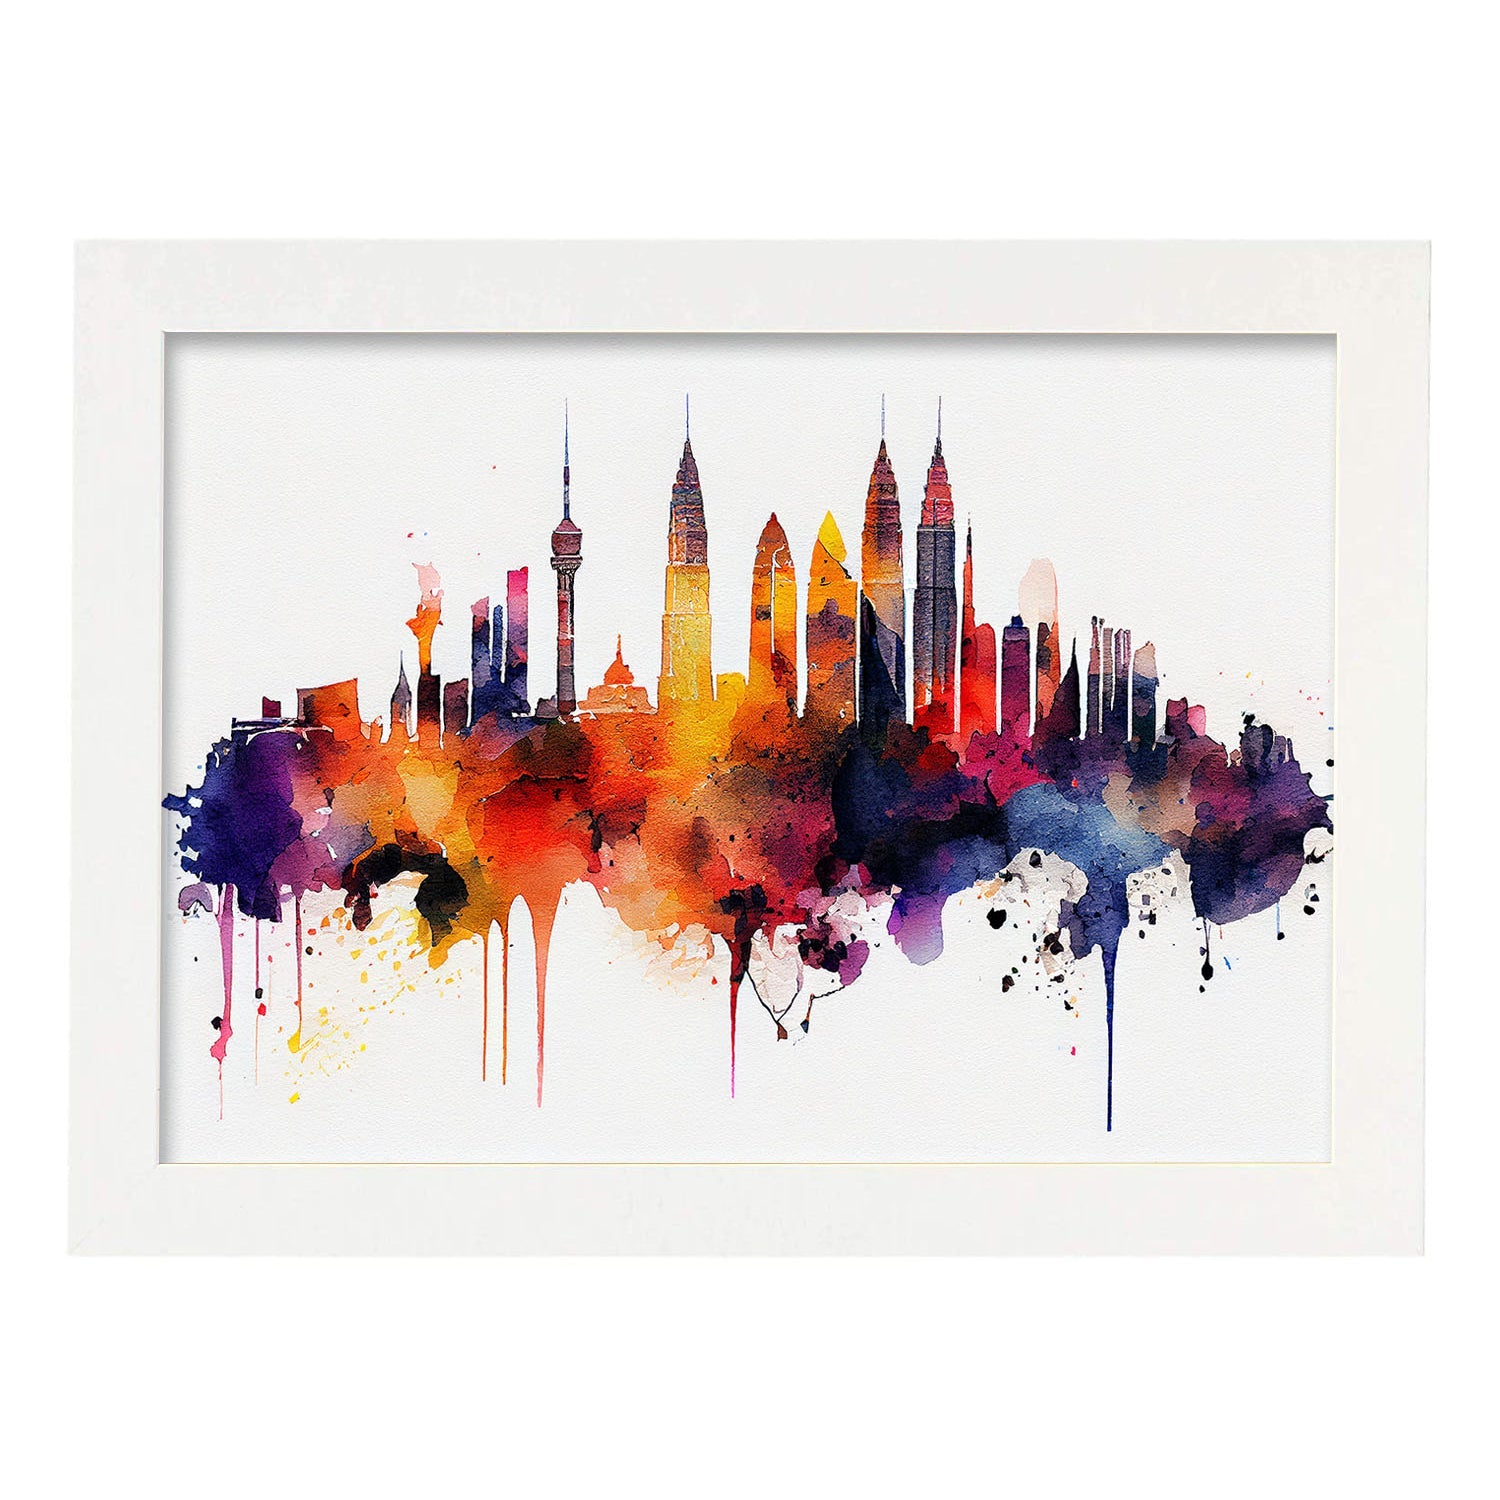 Nacnic watercolor of a skyline of the city of Kuala Lumpur_2. Aesthetic Wall Art Prints for Bedroom or Living Room Design.-Artwork-Nacnic-A4-Marco Blanco-Nacnic Estudio SL